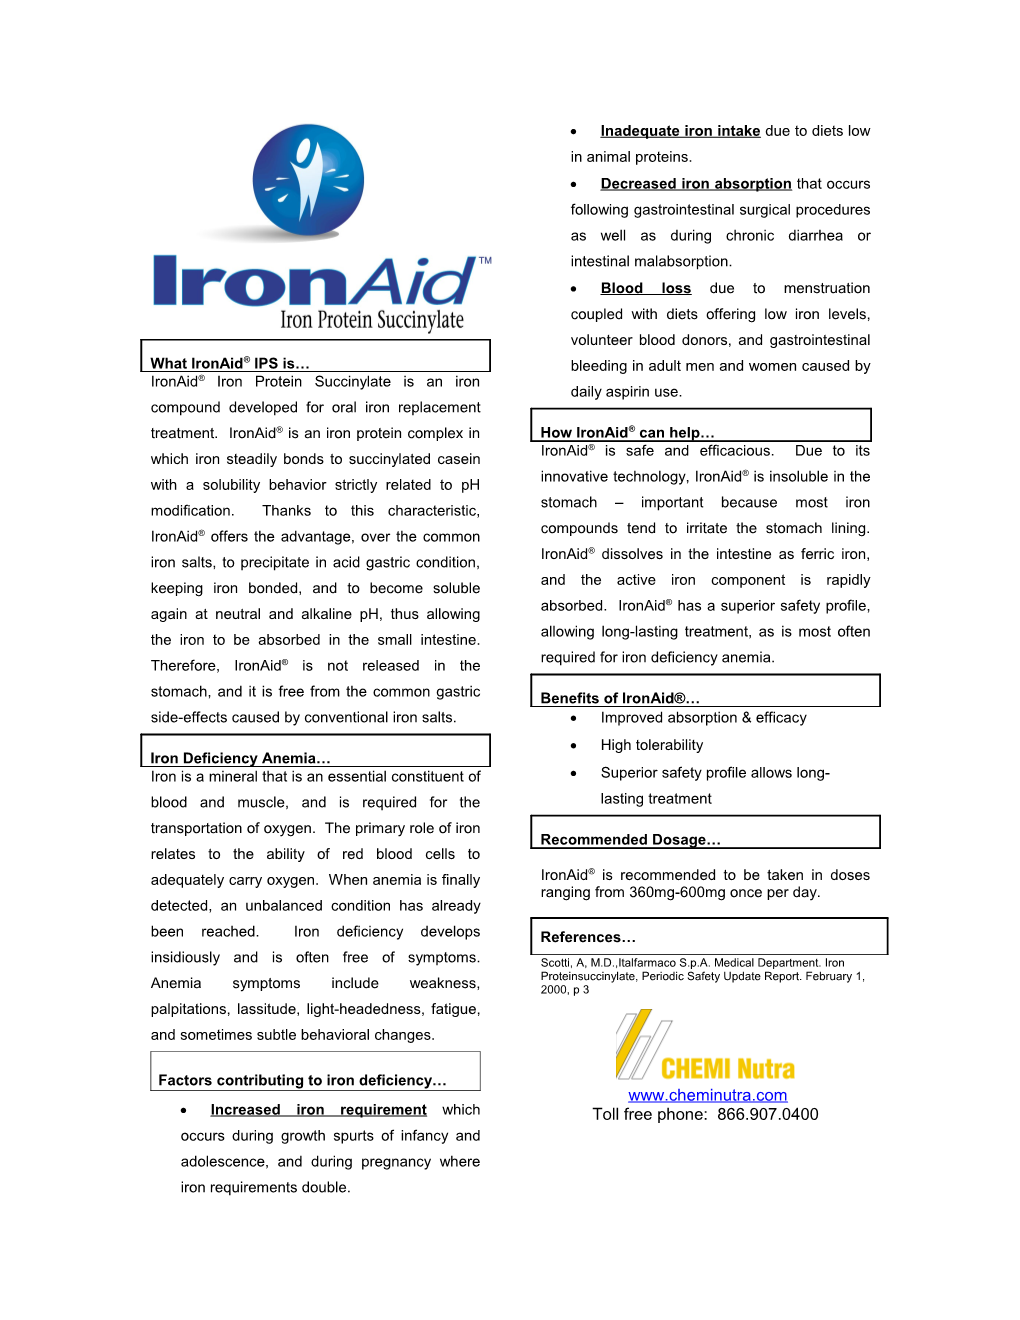 Factors Contributing to Iron Deficiency